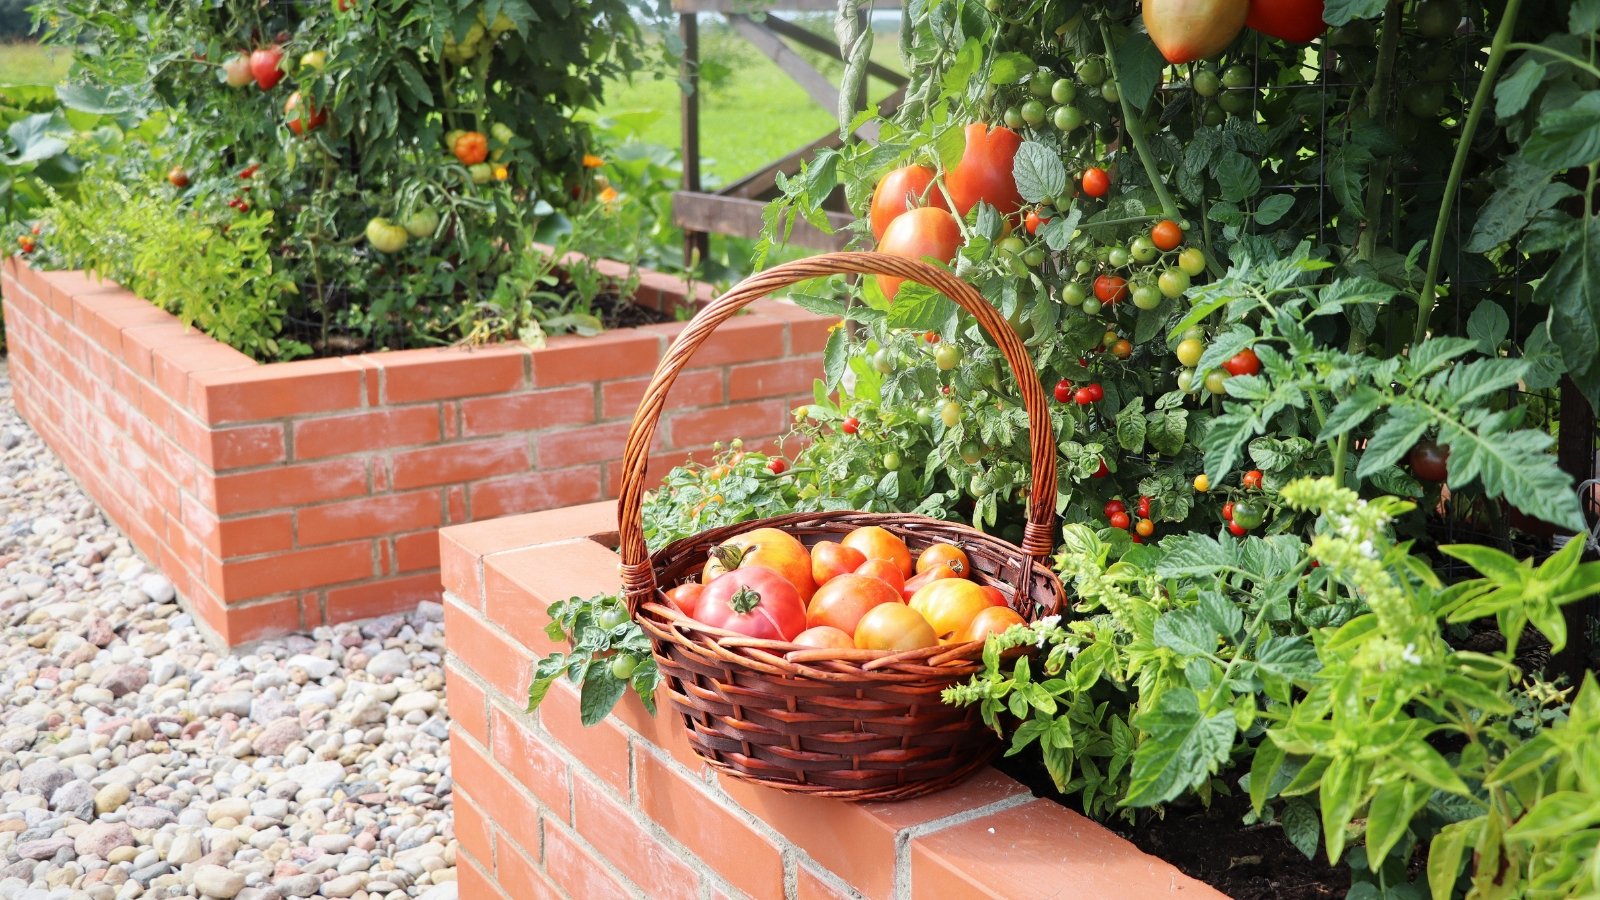 Tomatoes with companion plants in garden